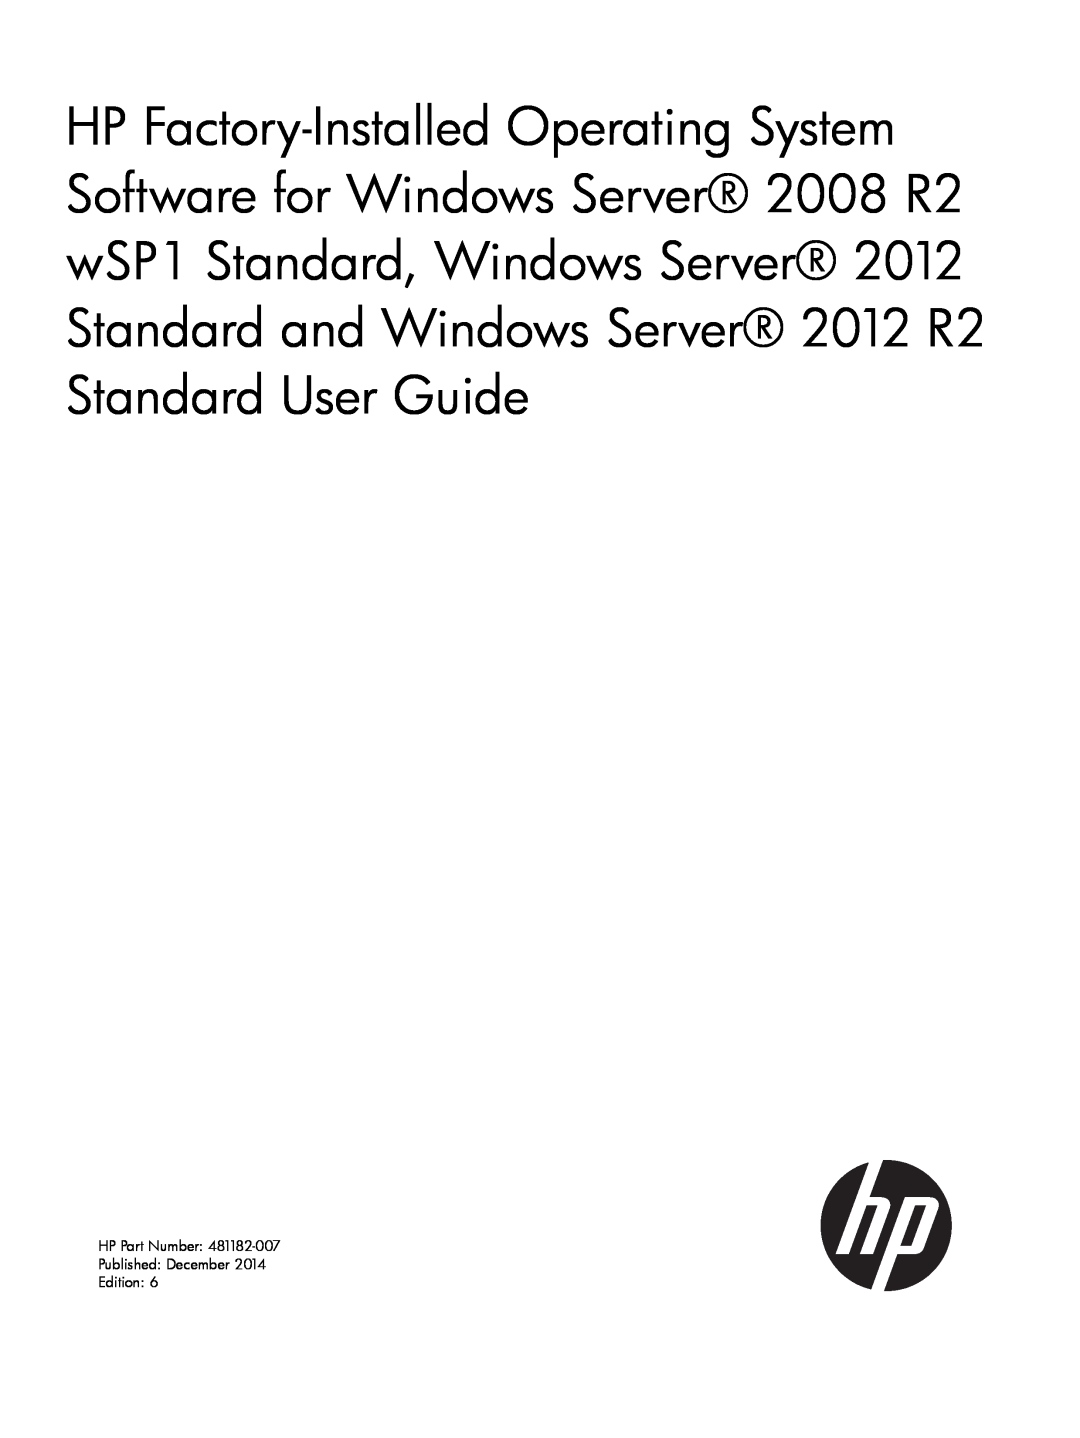 HP Microsoft Windows Server 2012 manual HP Part Number Published December Edition 